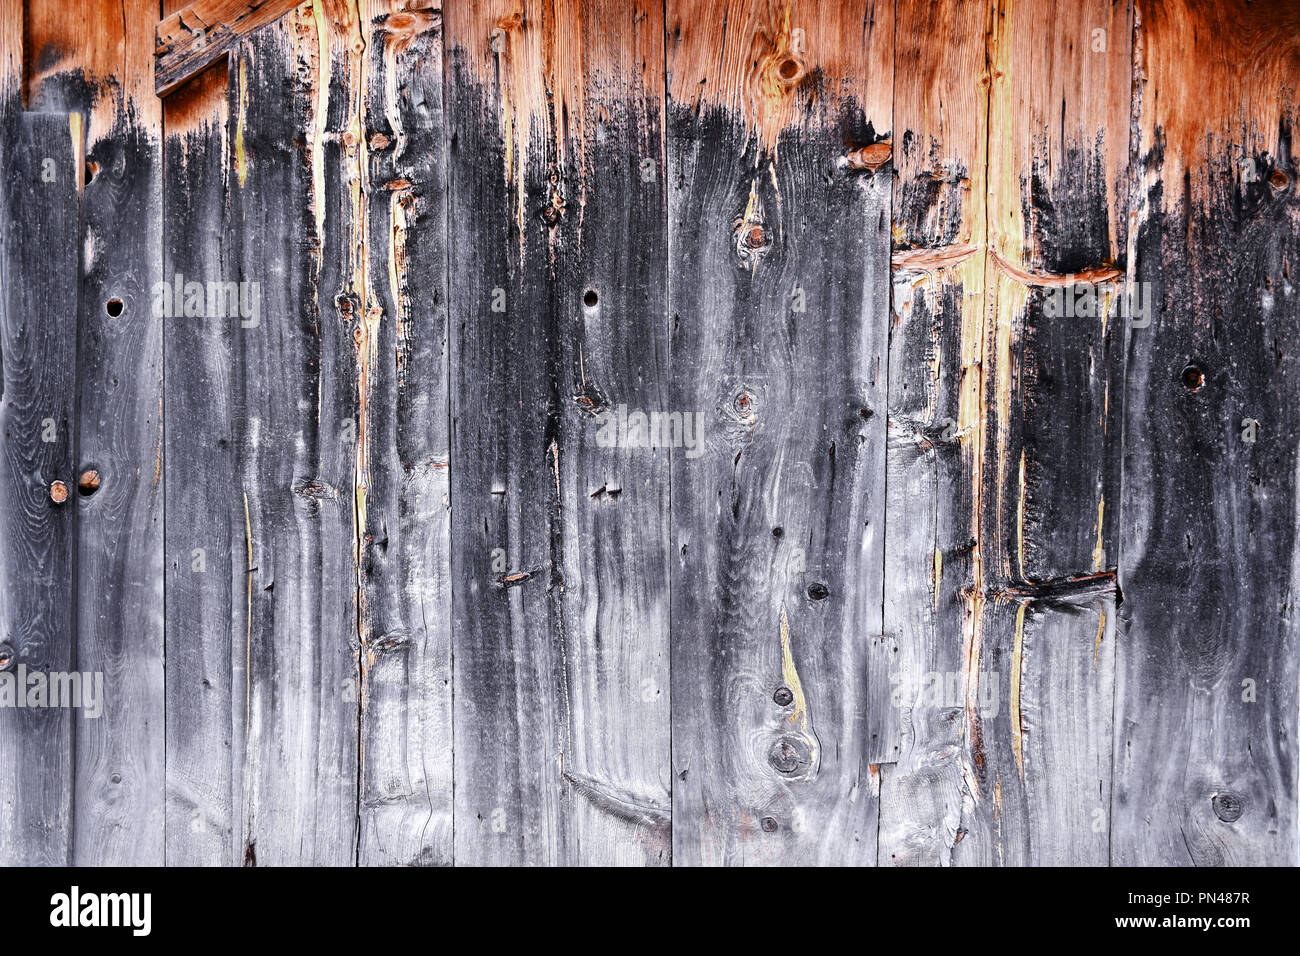 Two-toned wooden wall with black and brown colors Stock Photo